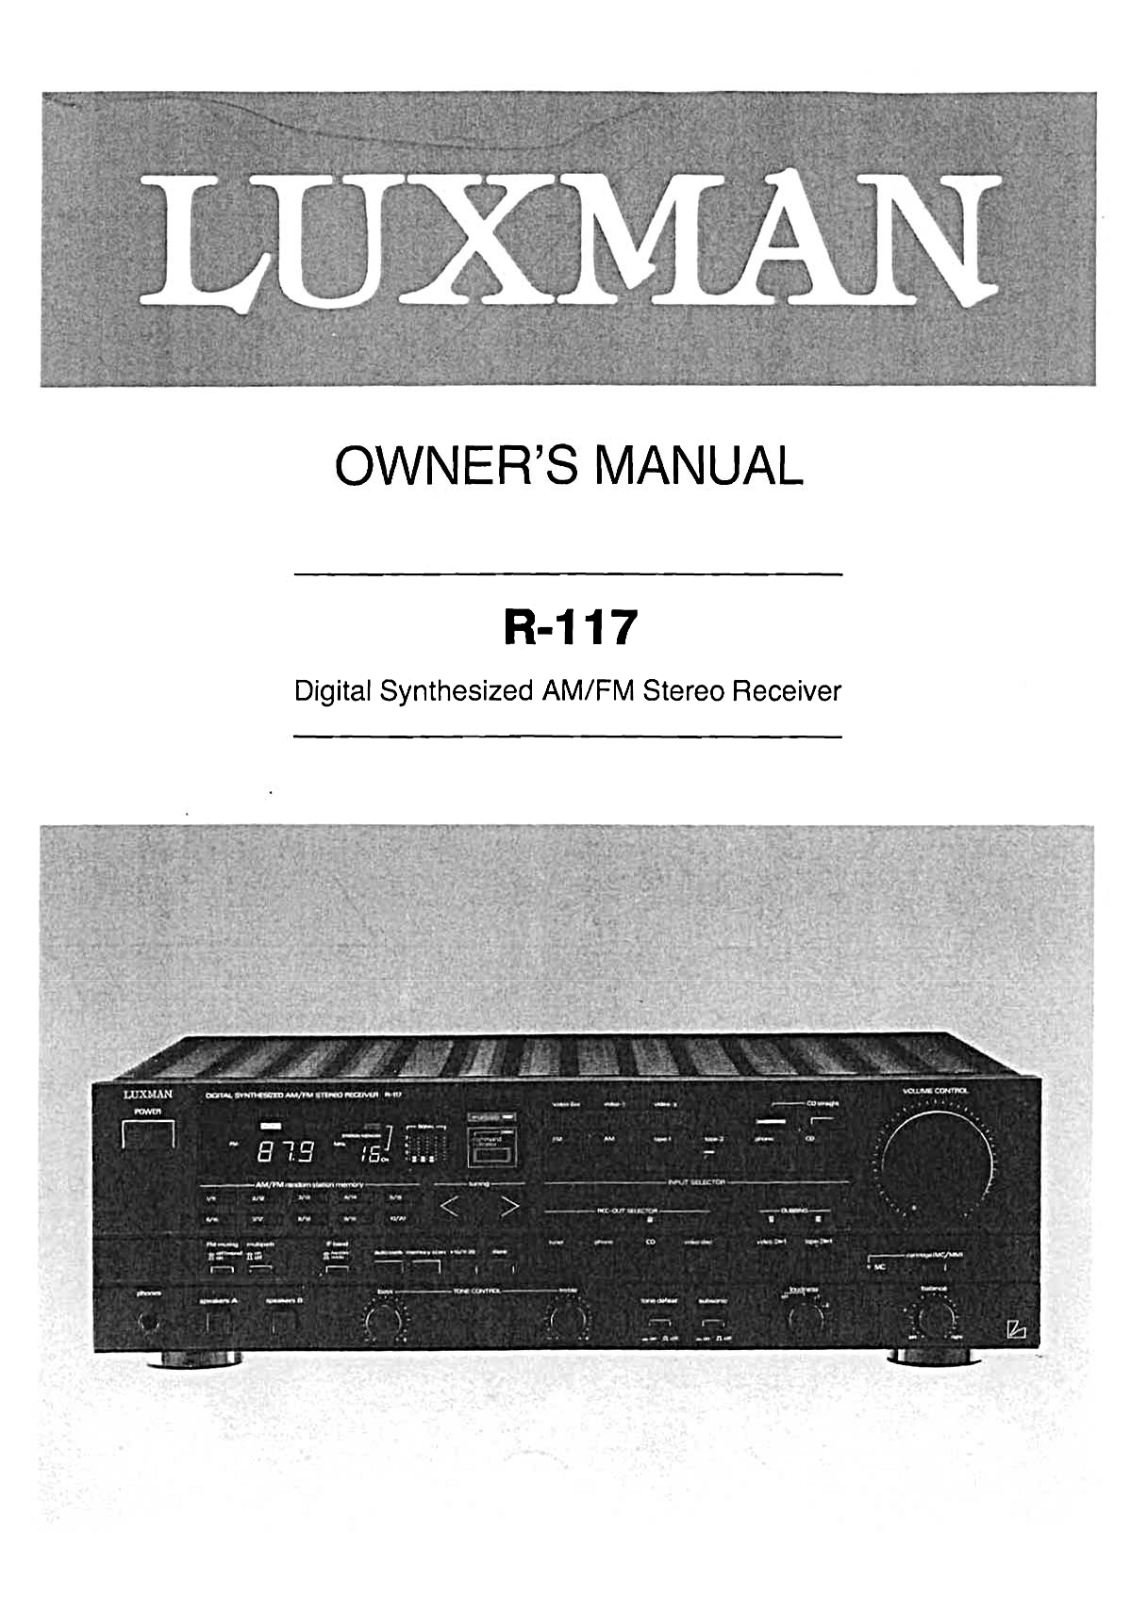 Luxman R-117 Owners Manual